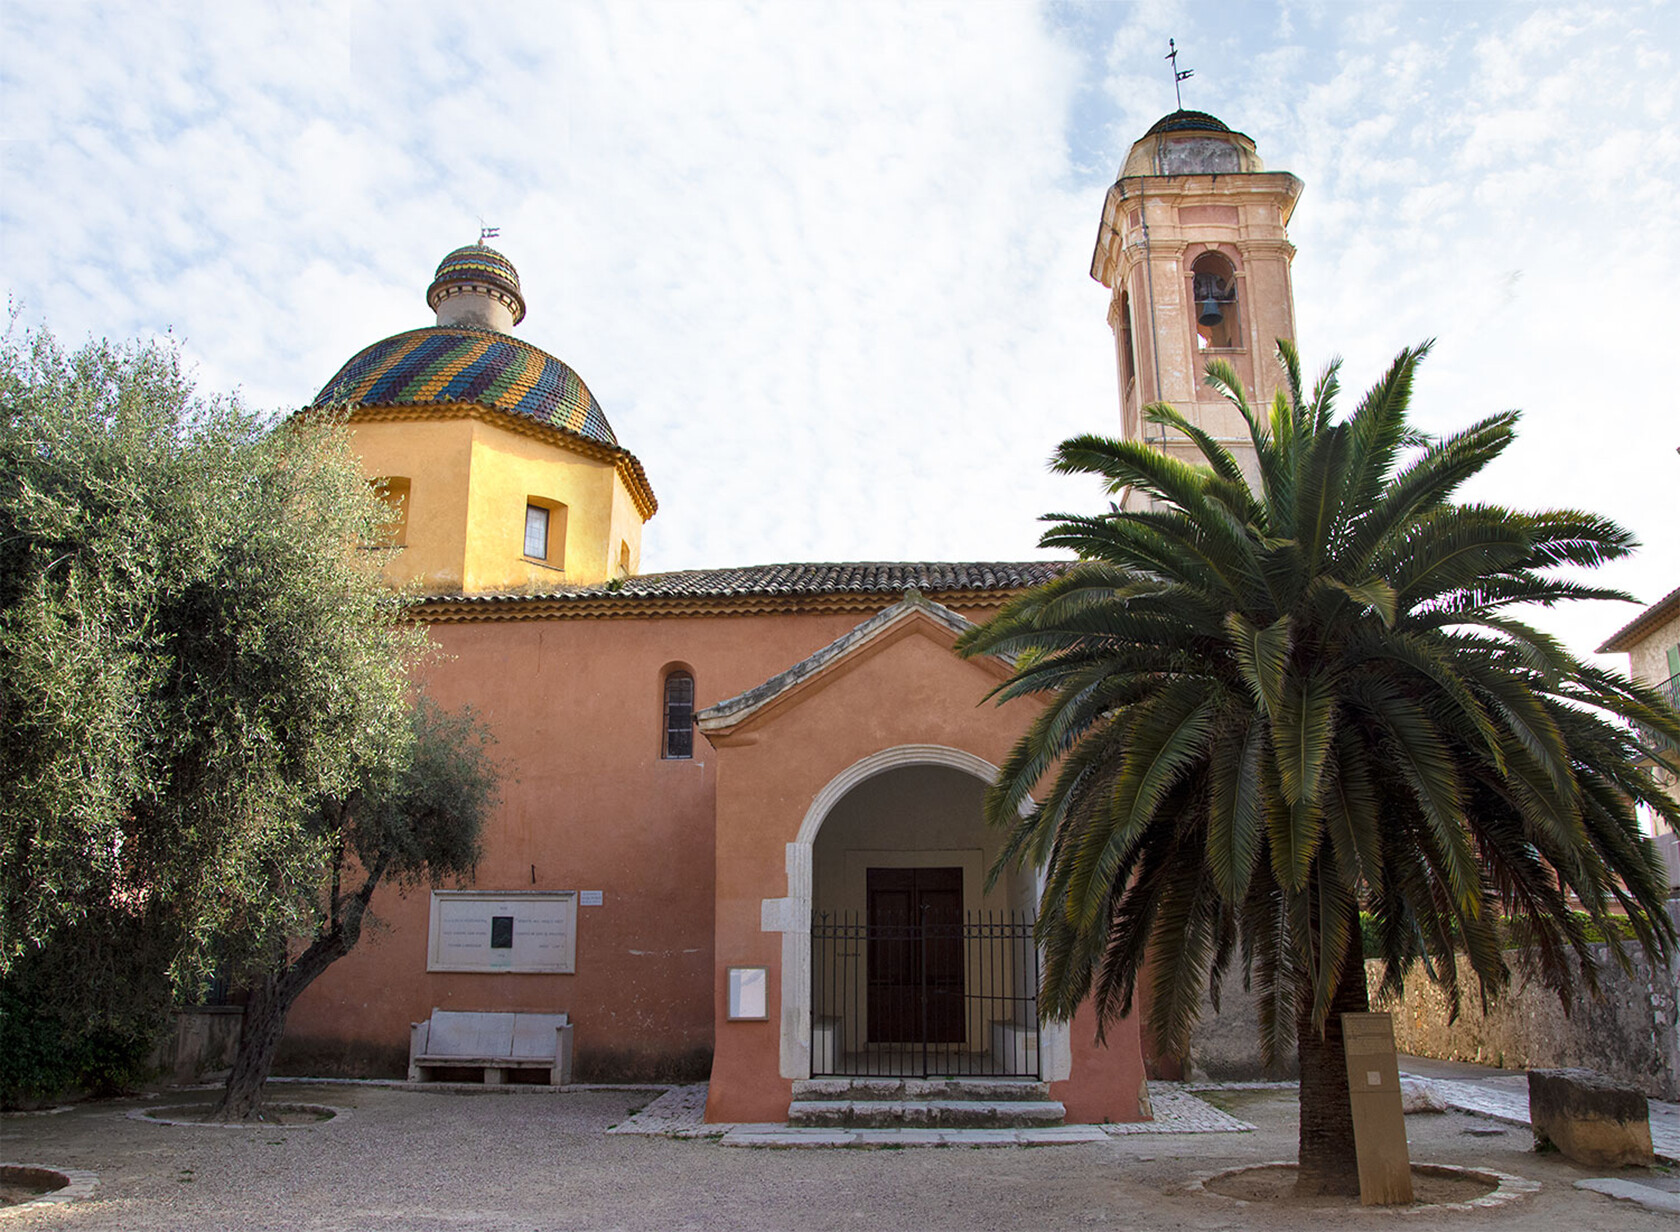 The Chapel of the White Penitents in Vence